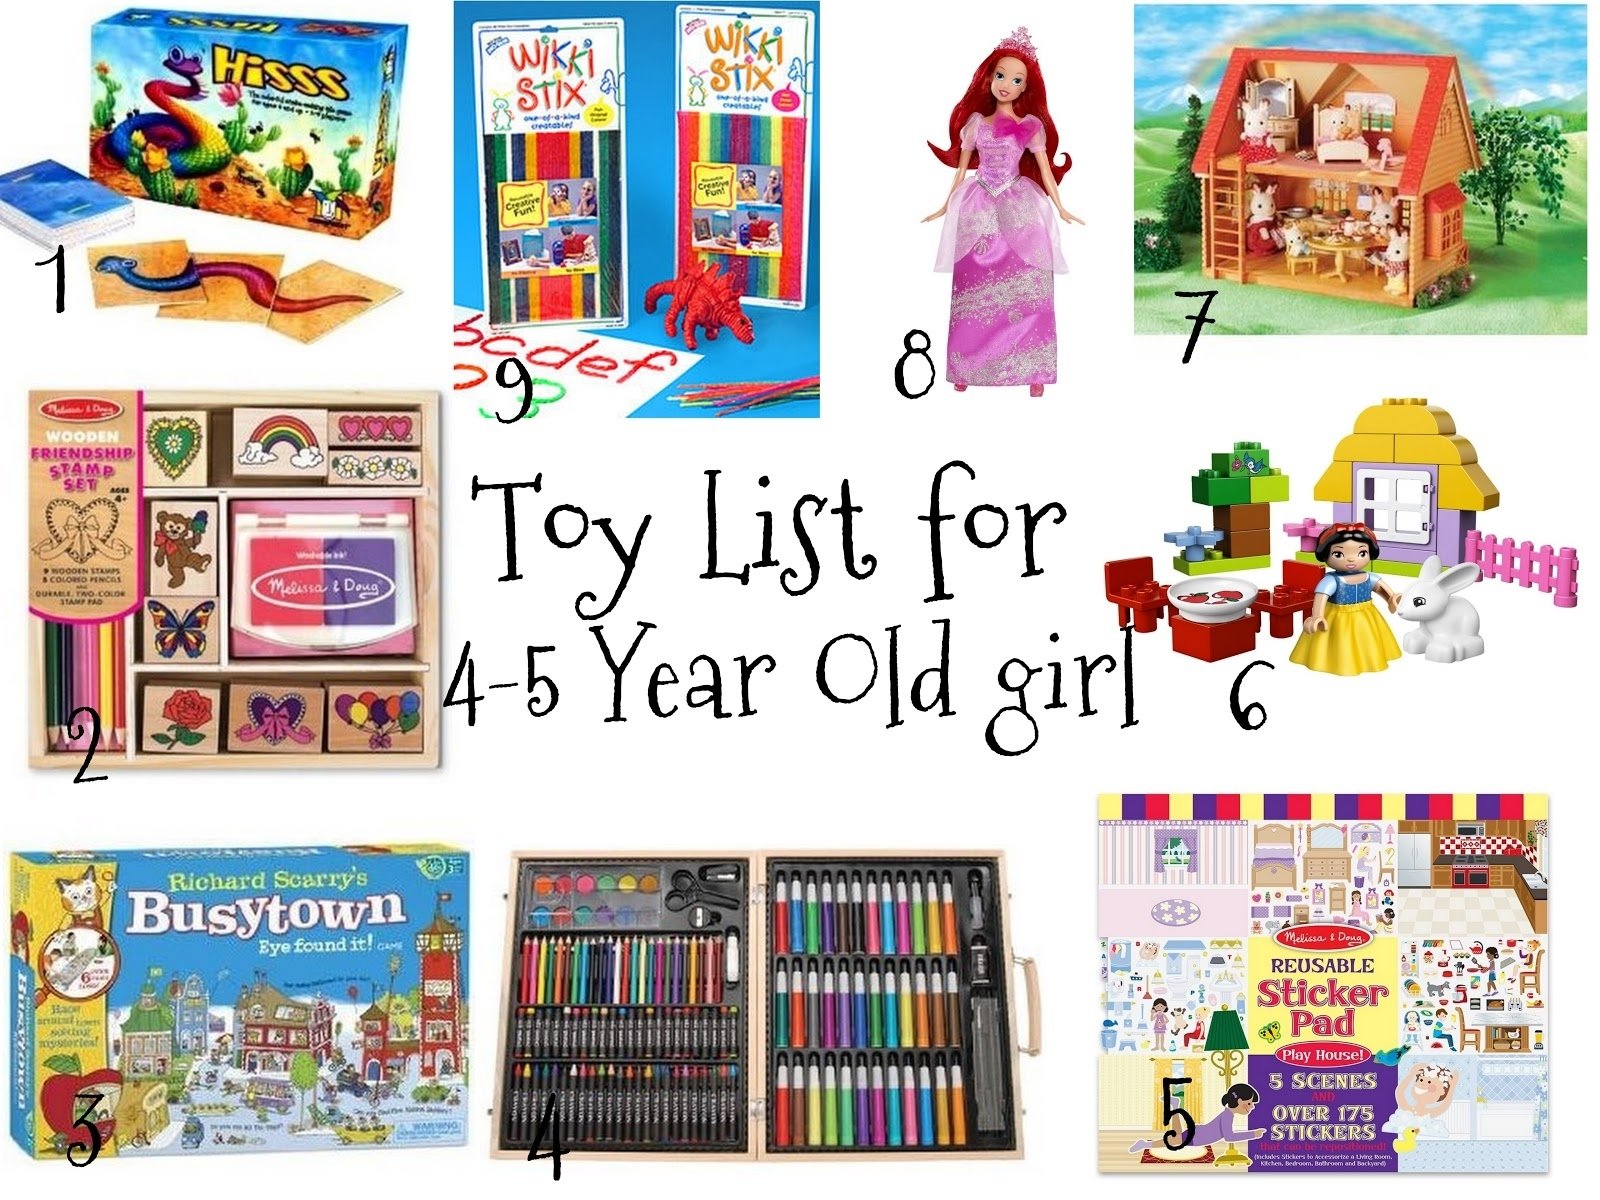 10 Most Recommended Gift Ideas For A 4 Year Old Girl favorites and things christmas toy list for 4 5 year old girls 5 2022